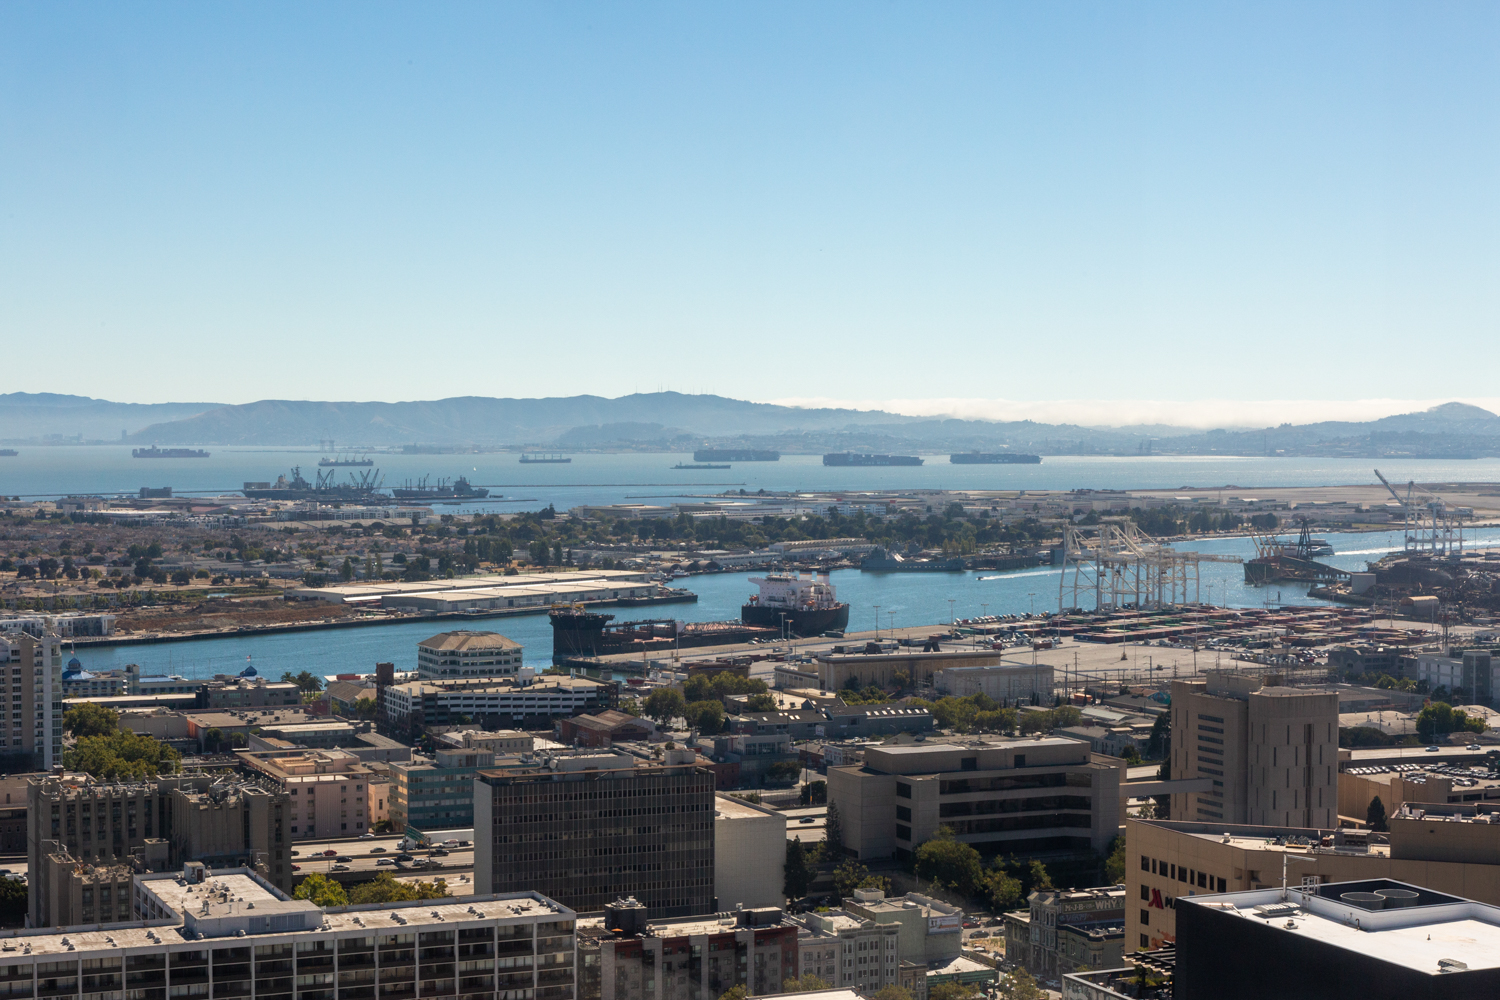 The Port Of Oakland, where the Oakland A's proposed stadium could rise if the team commits to the project, view from the Atlas at 385 14th Street, image by Andrew Campbell Nelson